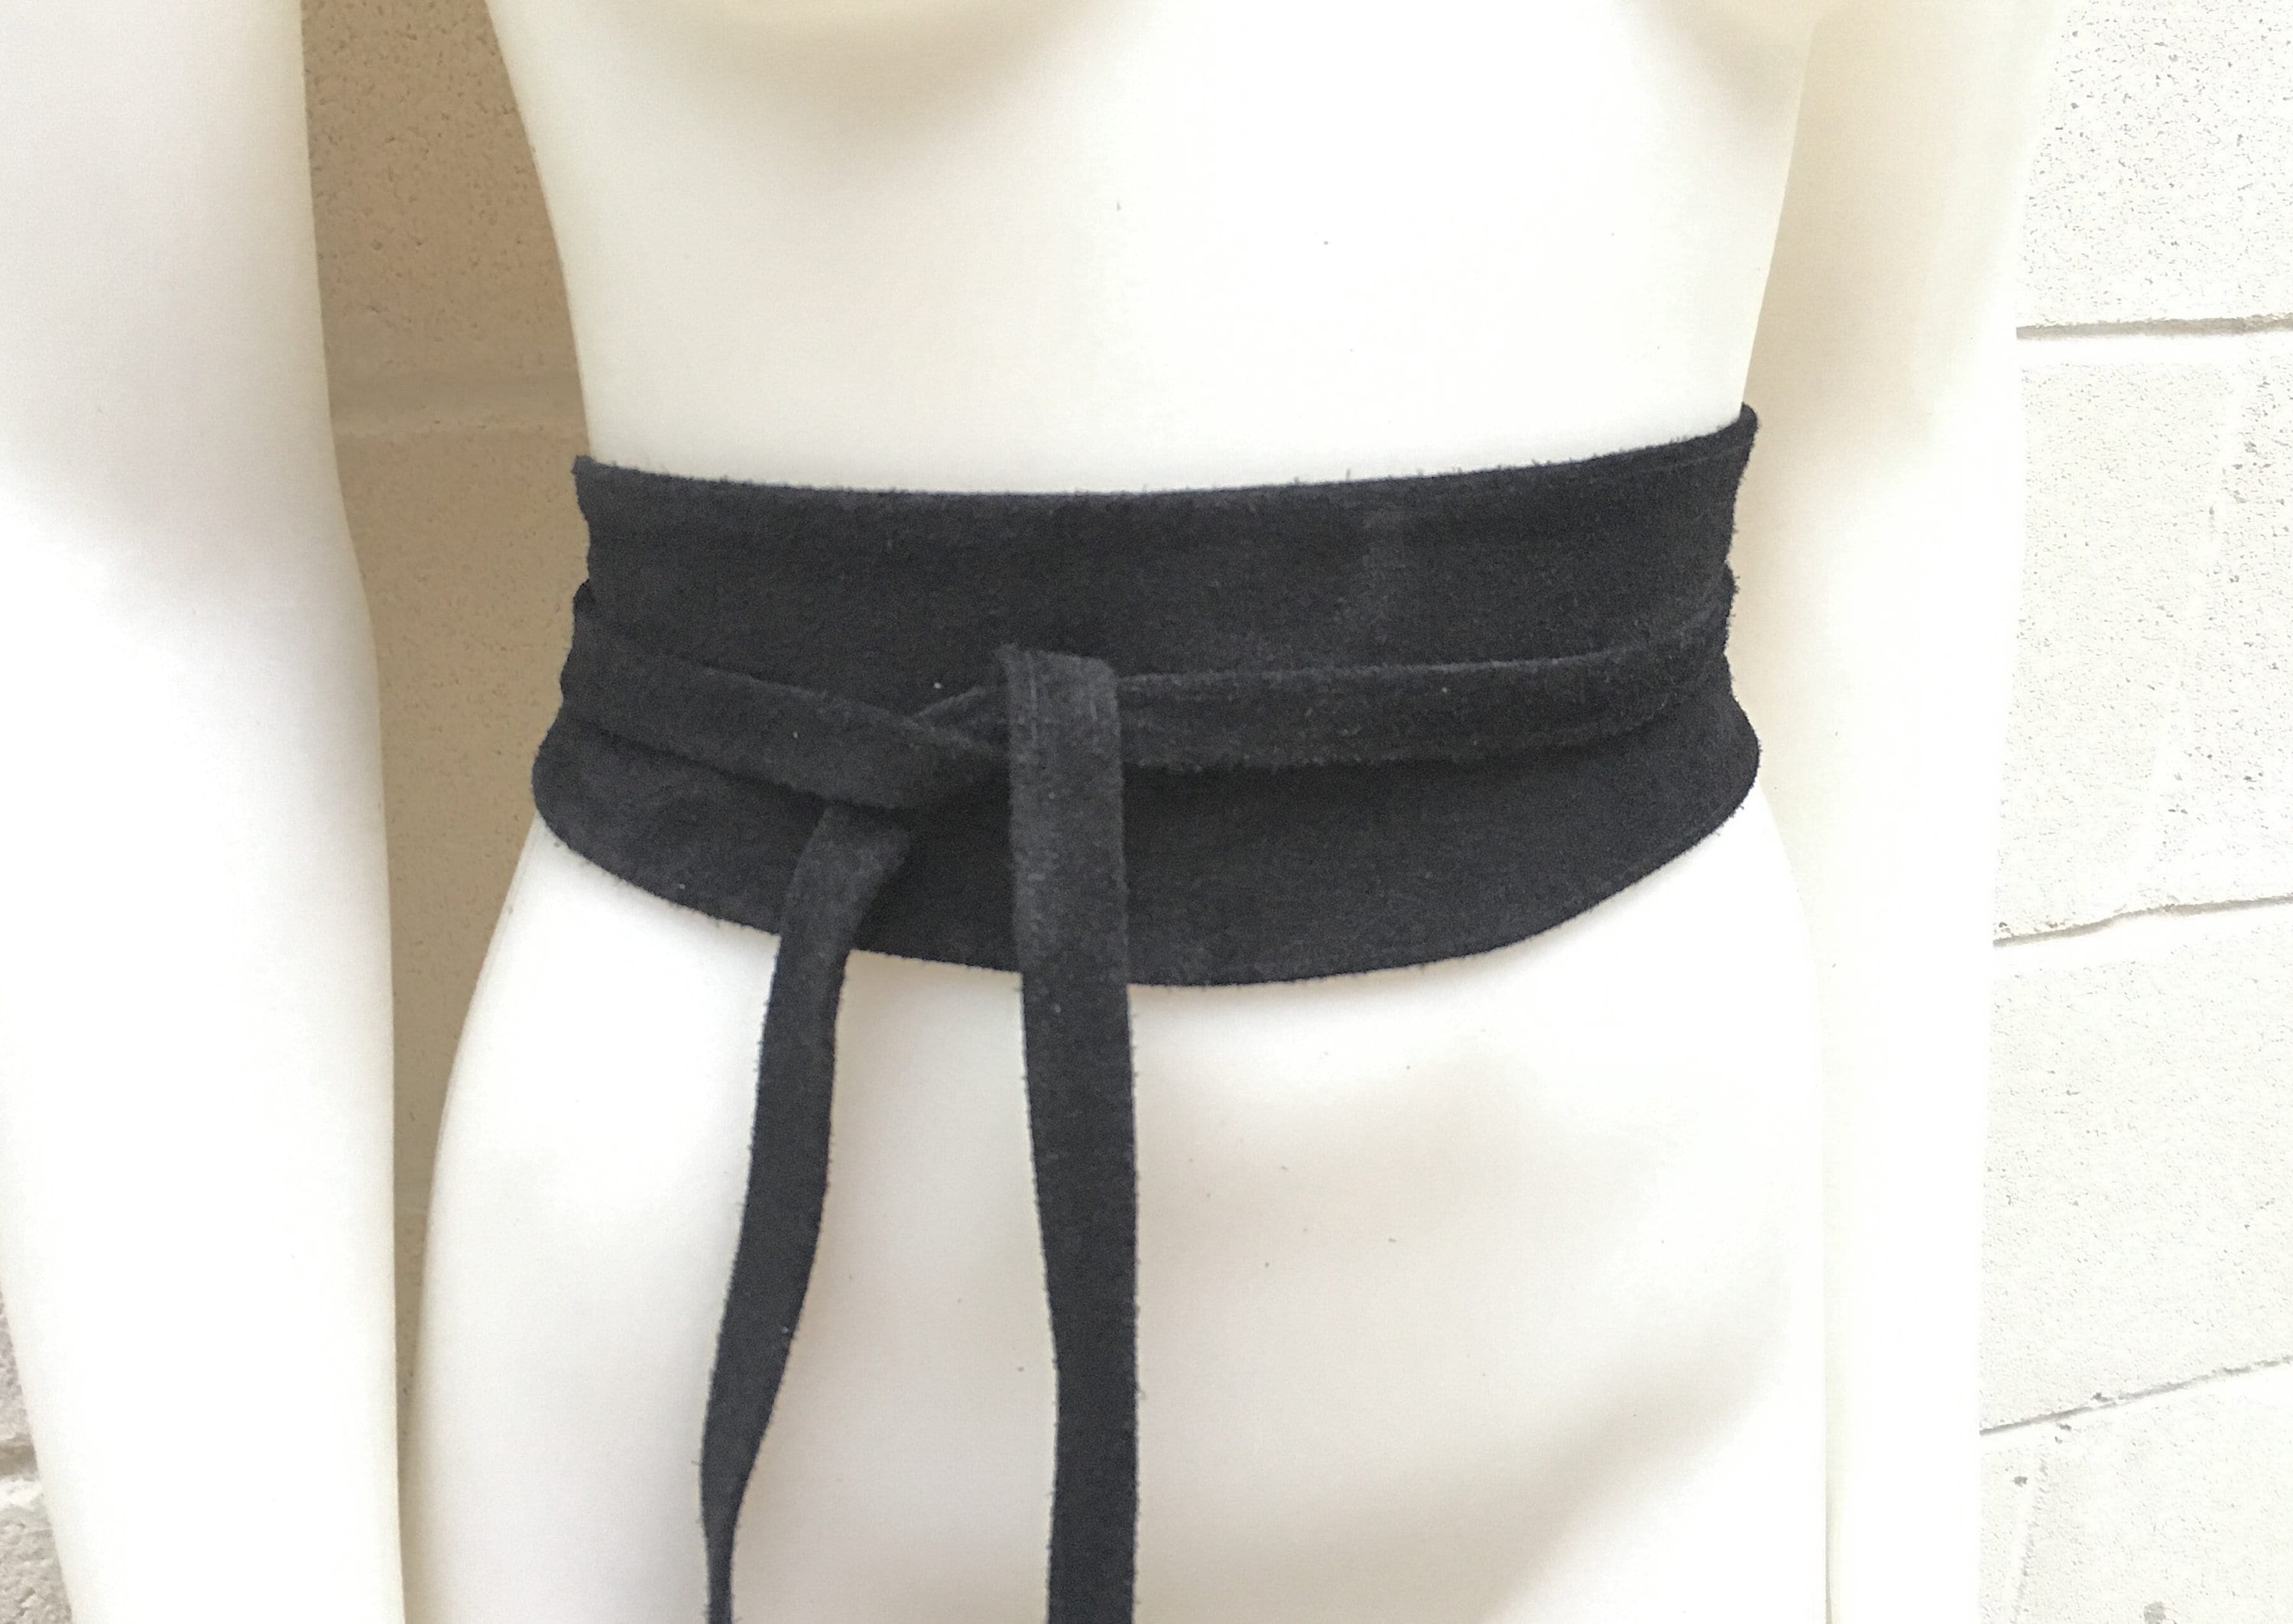 Cast Rope Belt - Black Suede with Antique Brass – Kim White Bags/Belts